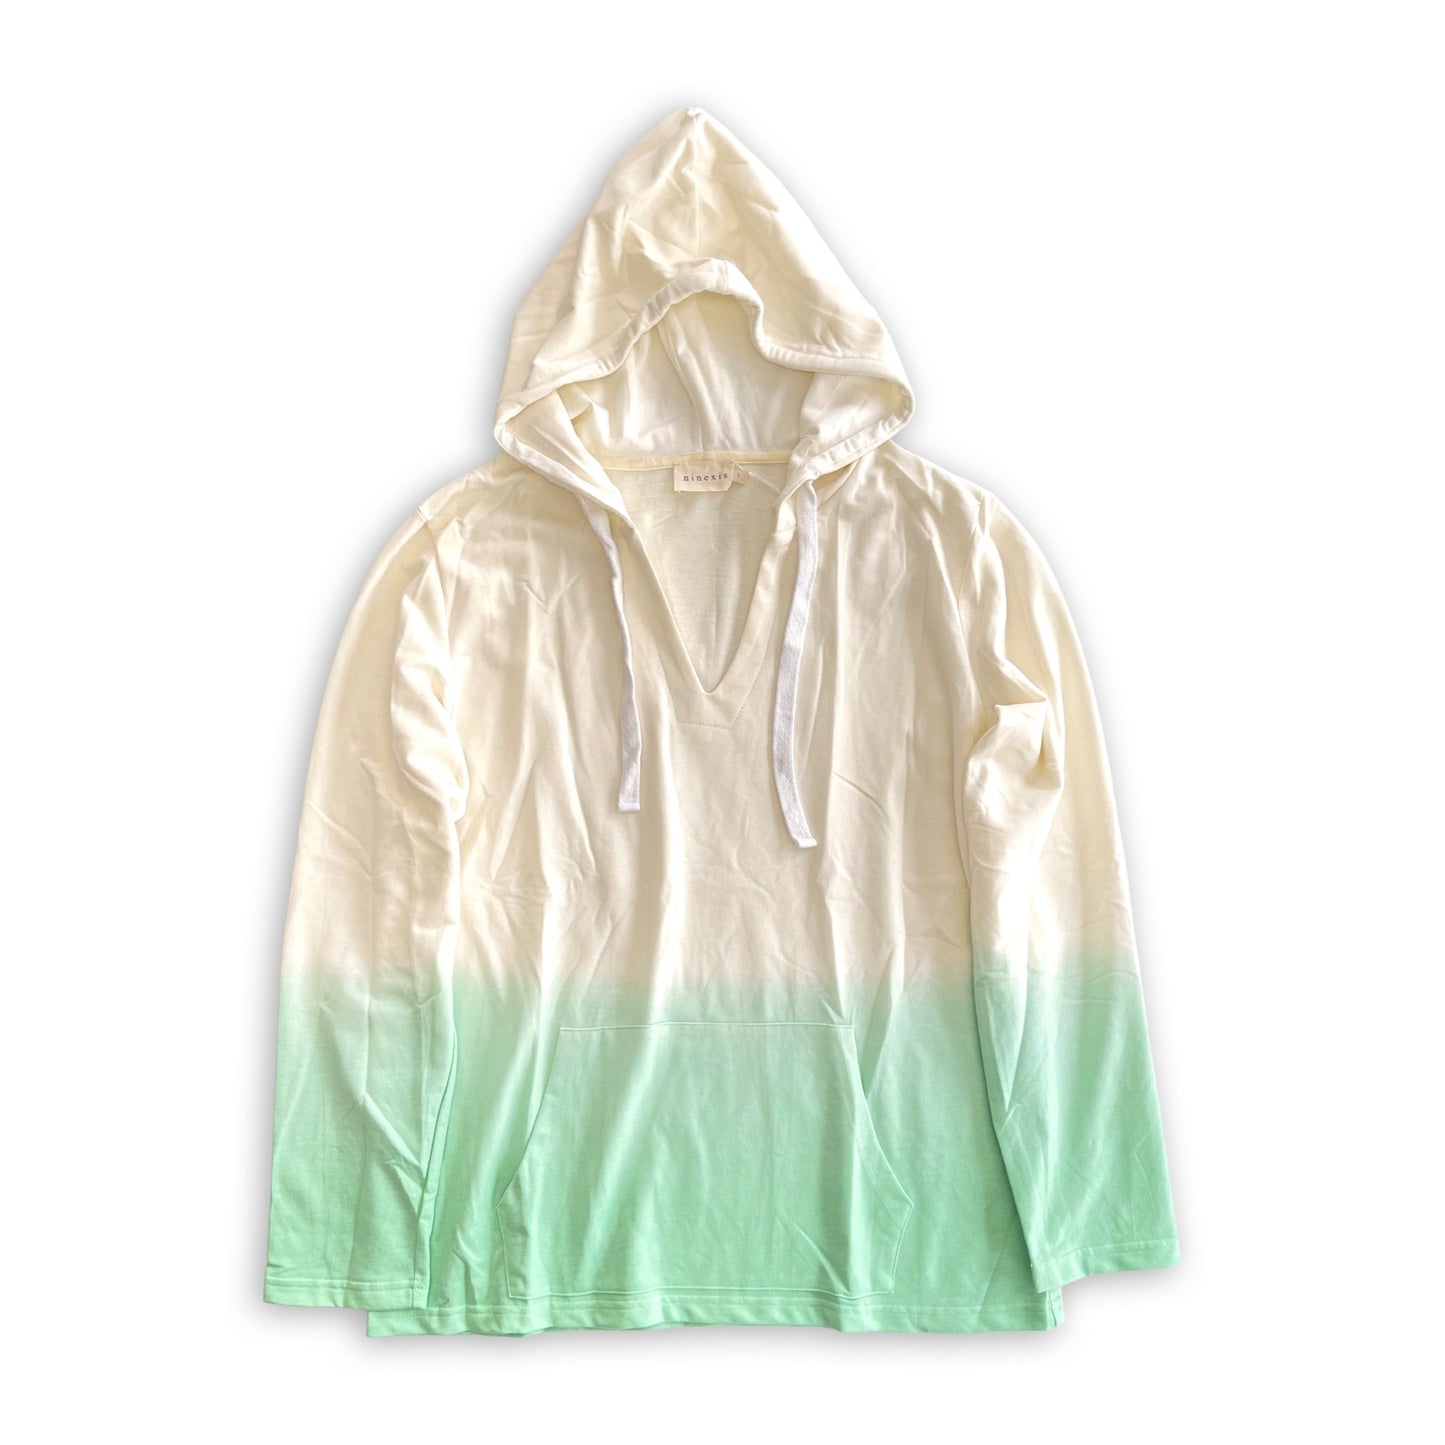 Get Together Hoodie in Mint